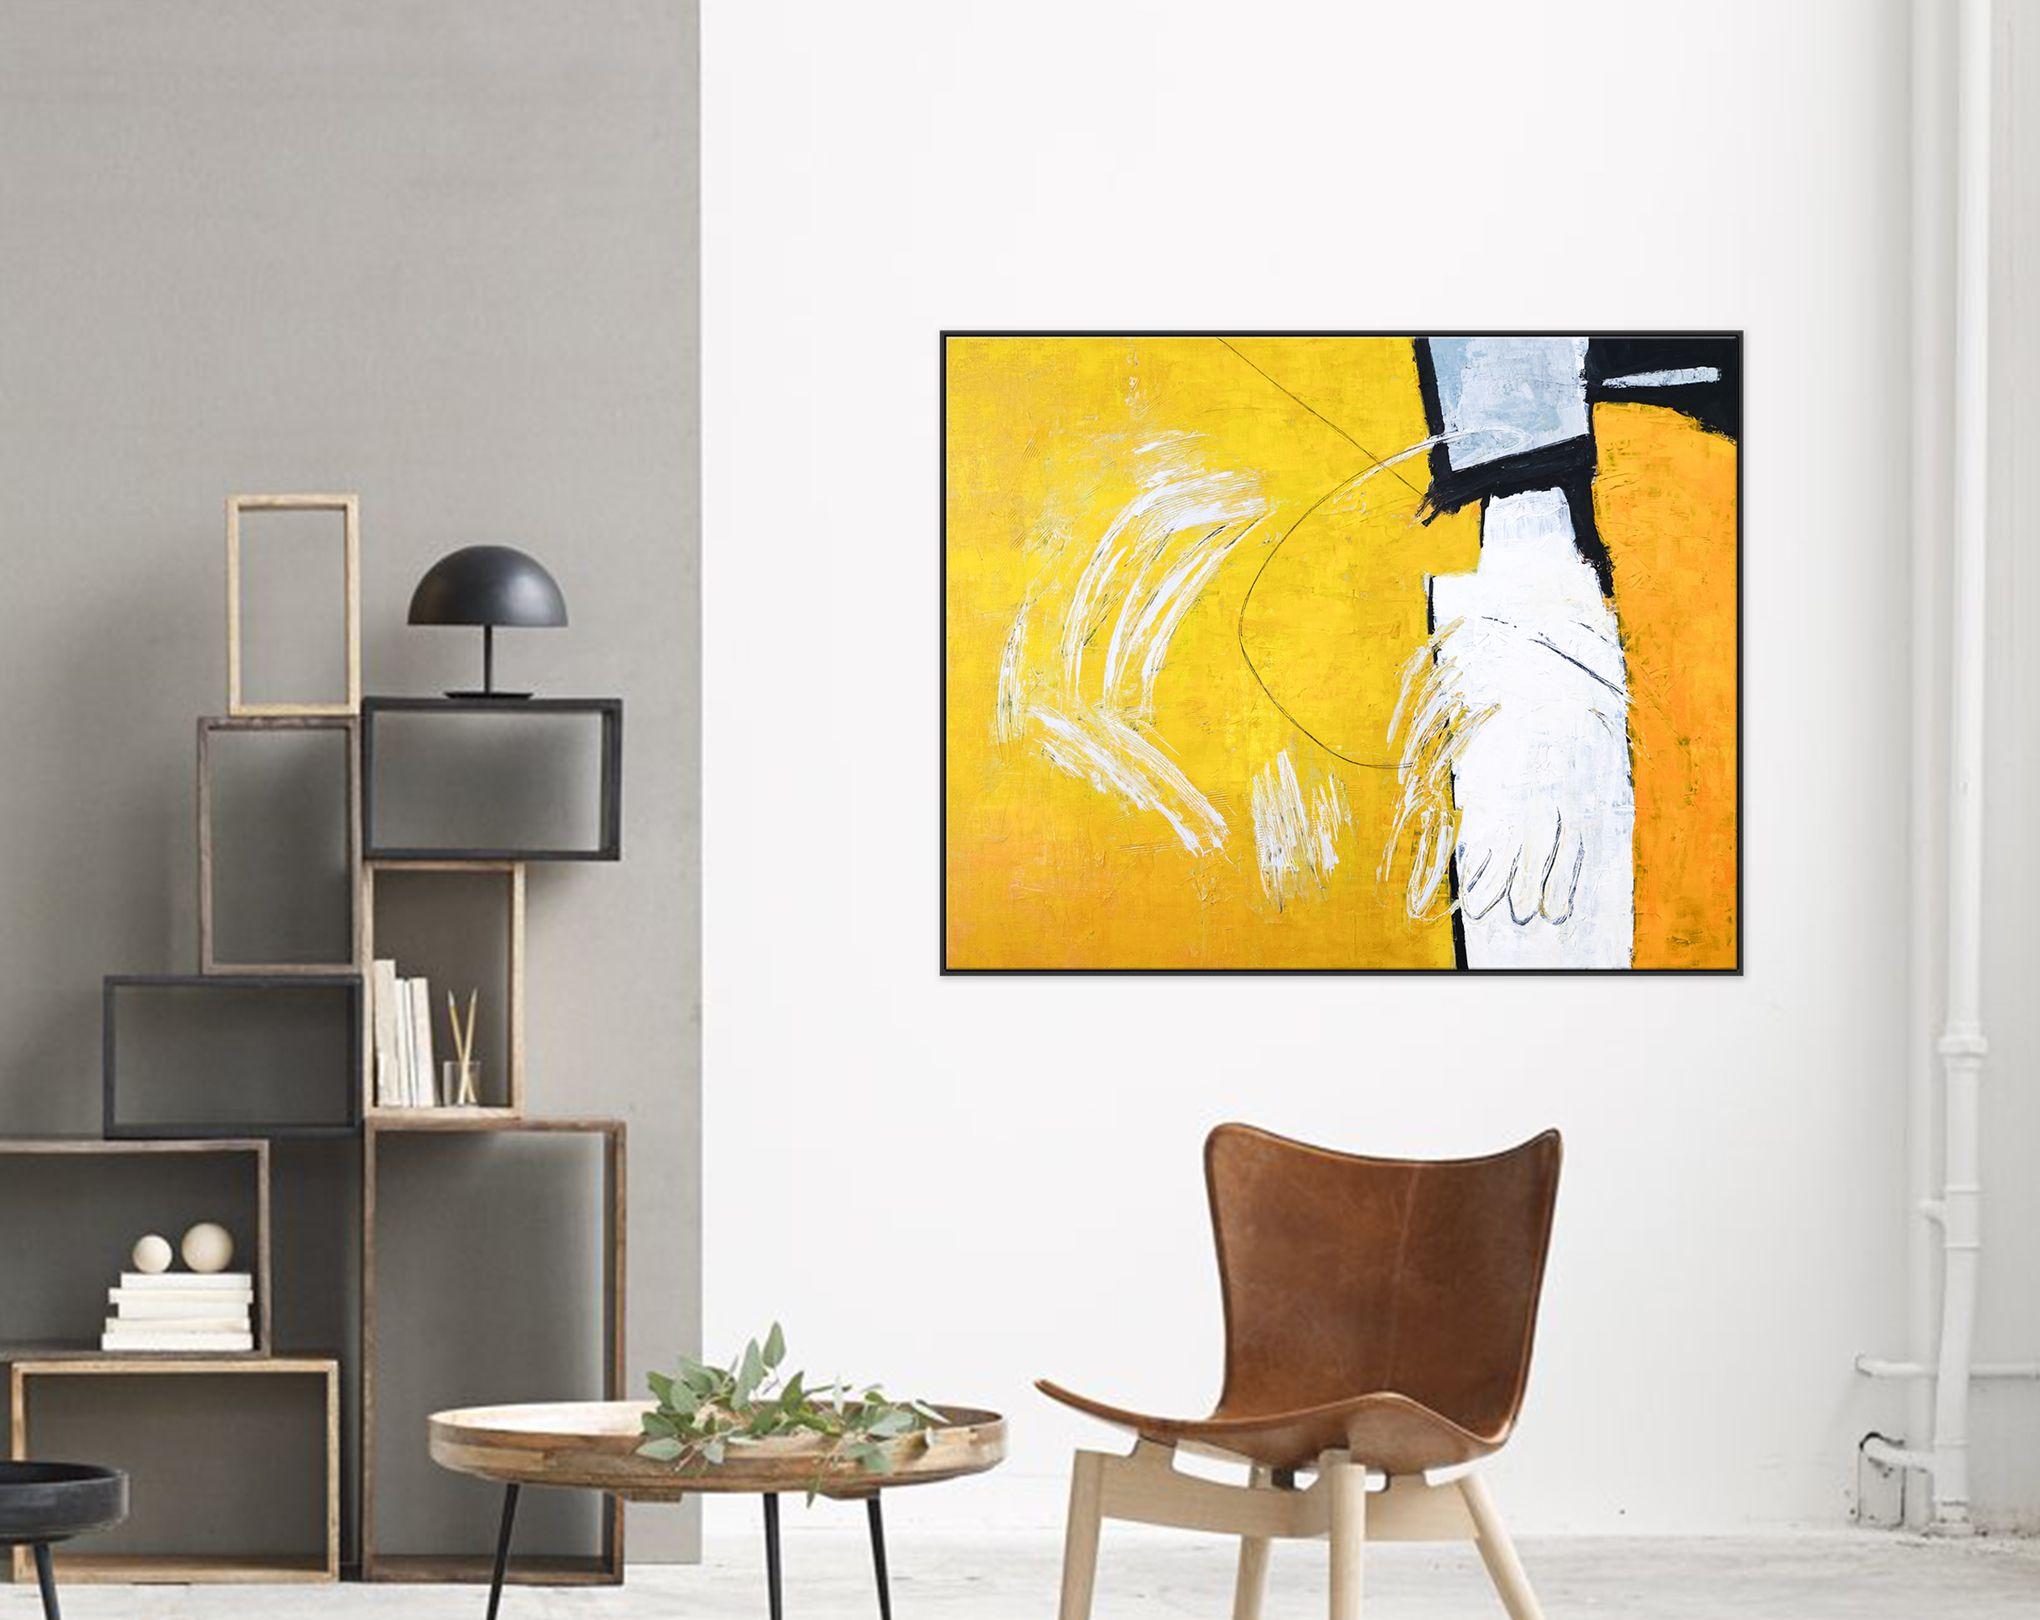 This painting is an improvisational and expressive abstract composition with simple yellow, white and black. â€¢ PICTURE HANGER ATTACHED: Yes â€¢ SIDES PAINTED: Yes â€¢ READY TO HANG: No (Rolled in tube) â€¢ ARTIST SIGNED: Yes â€¢ CERTIFICATE OF